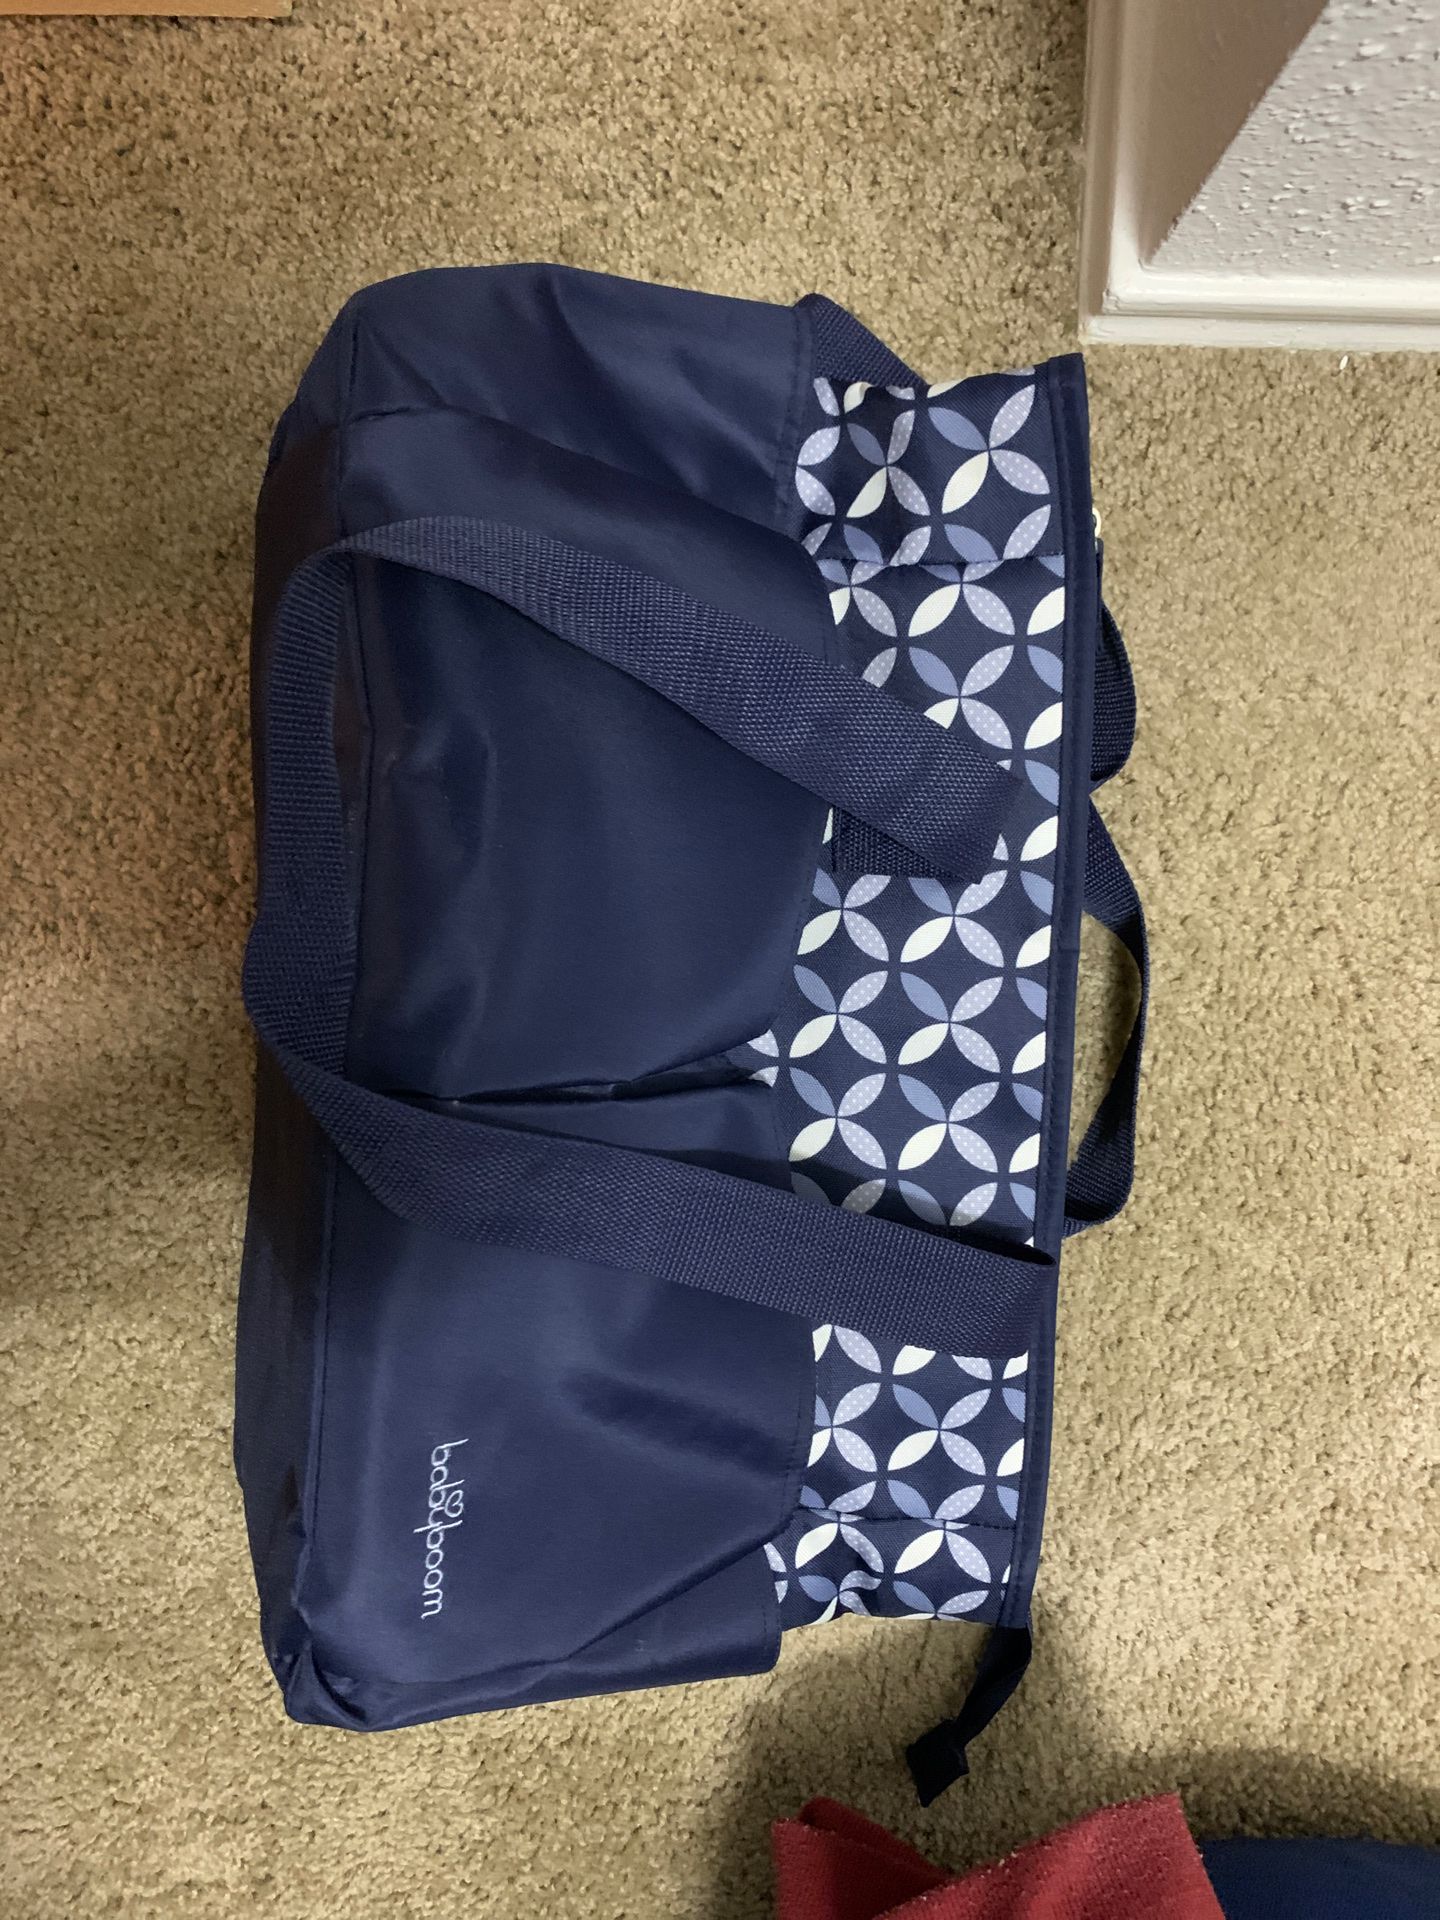 Baby boom diaper bag for sale